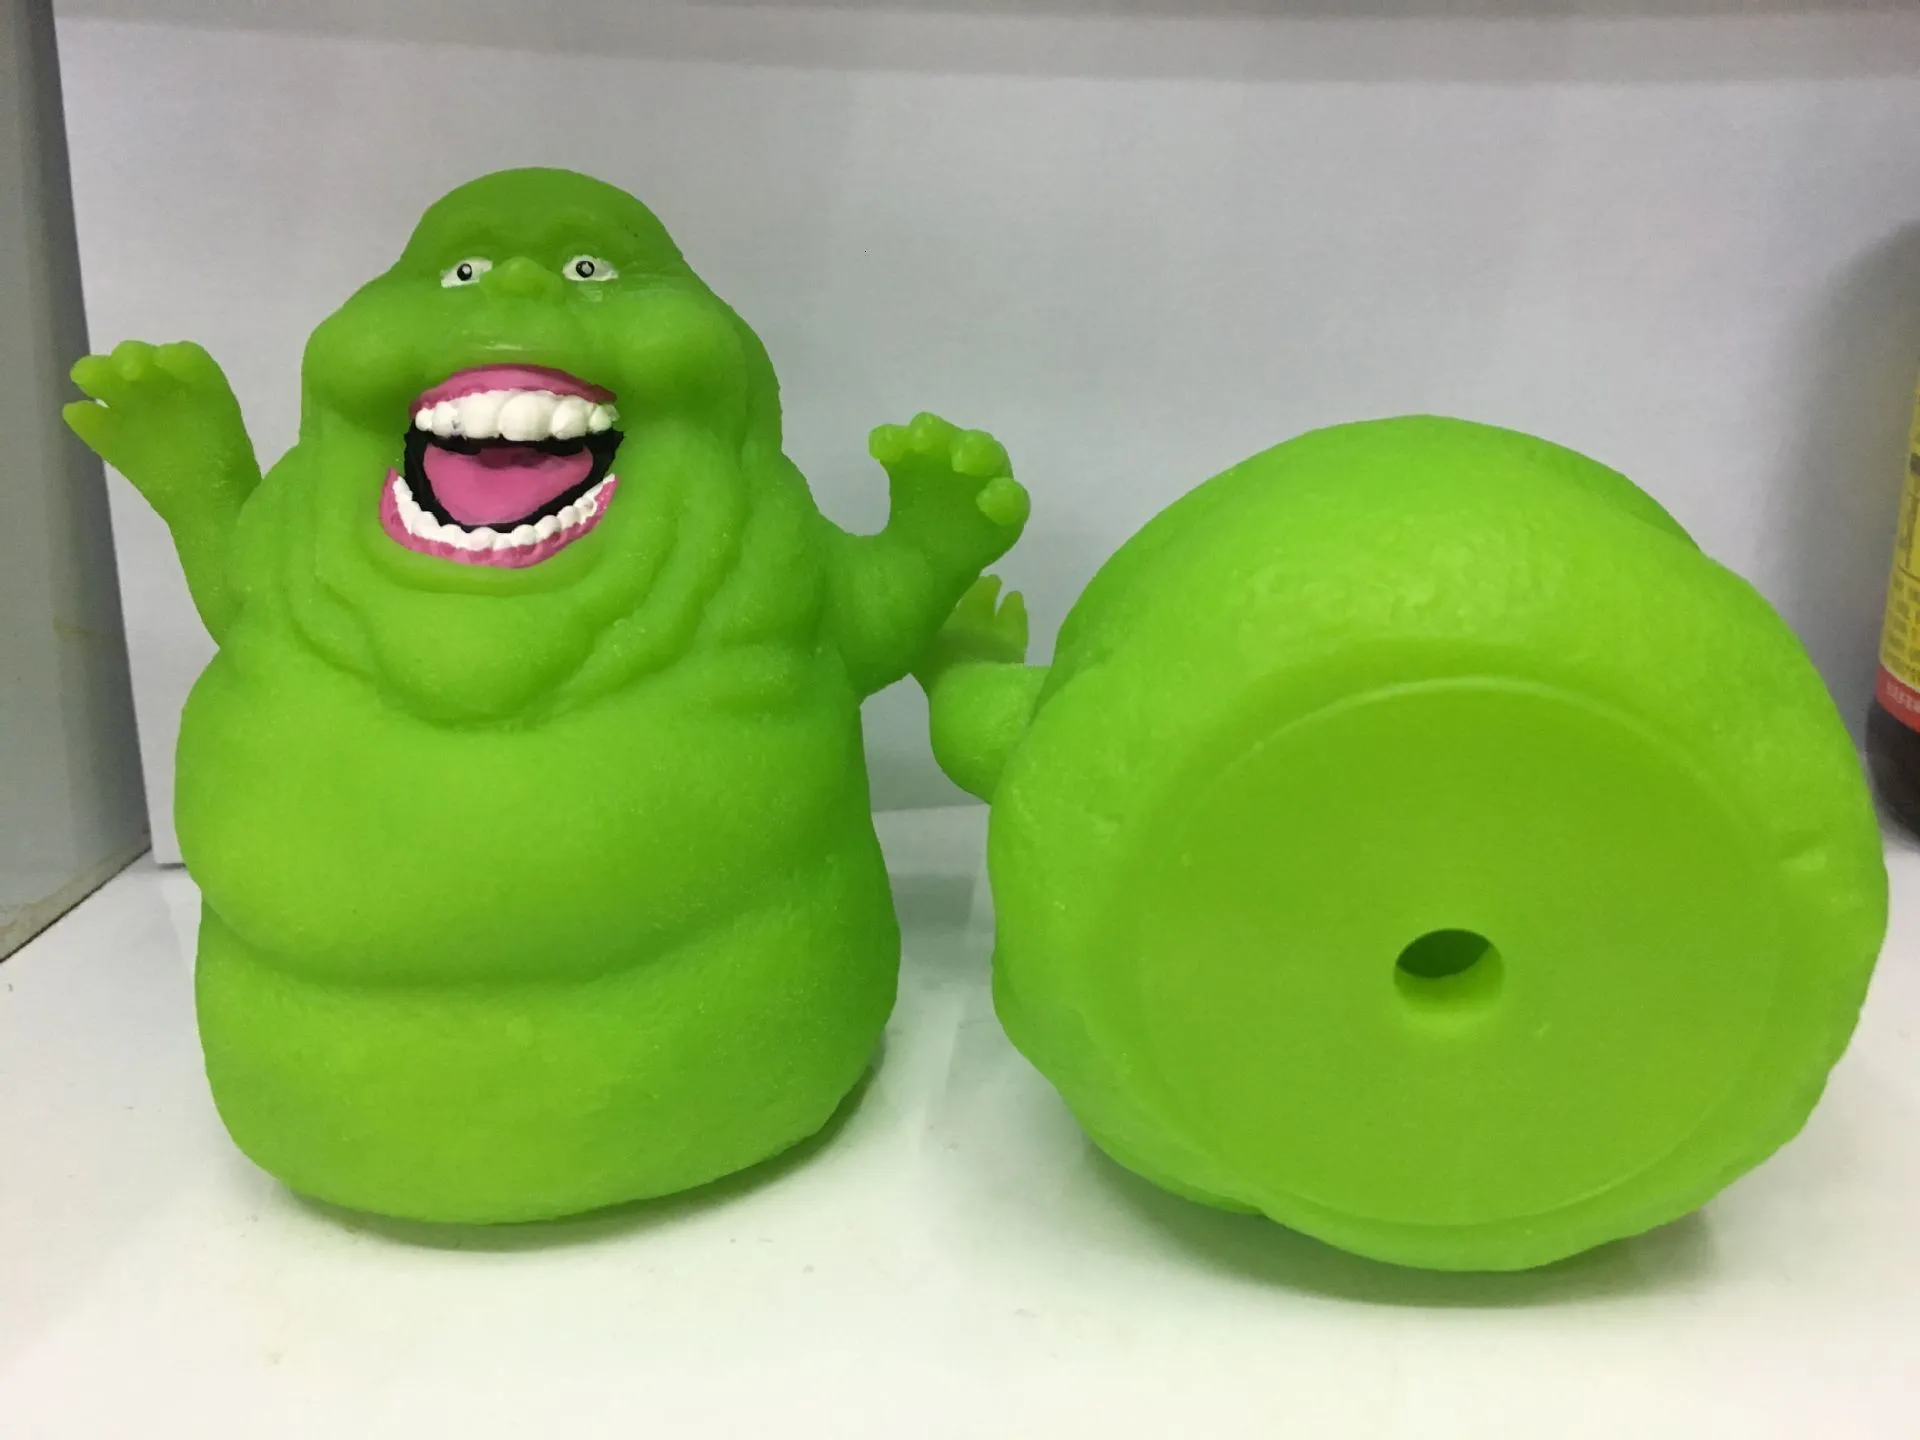 Set Cartoon Anime Ghostbusters Green Ghost Slimer Action Figure Doll Pvc Figures Model BB Knock Toys for Kids T20288S